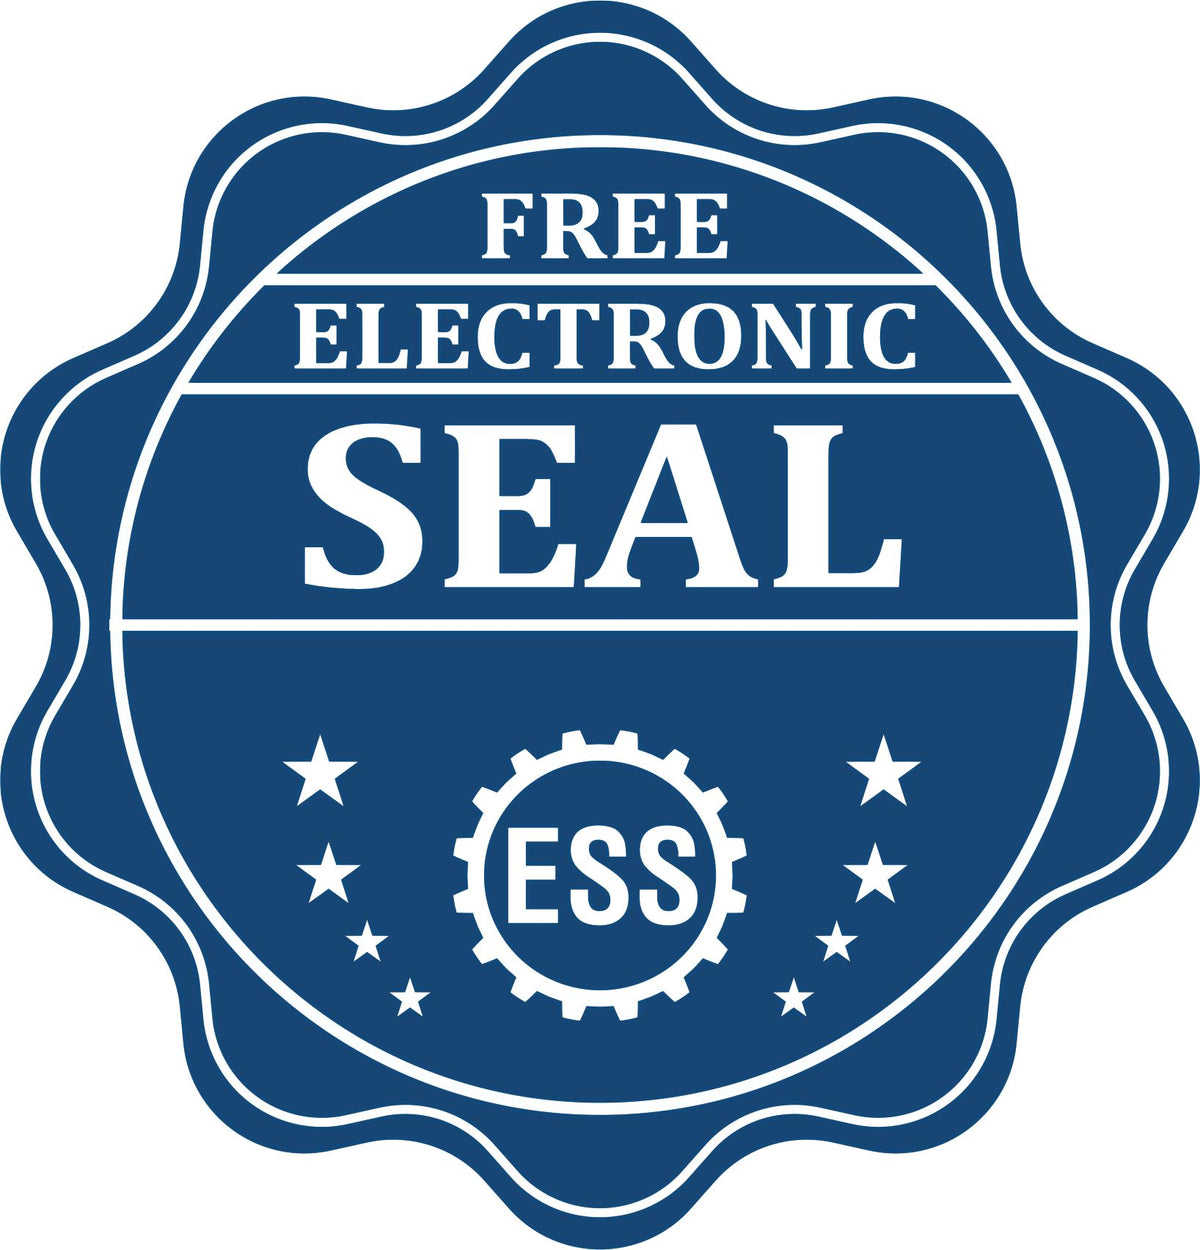 A badge showing a free electronic seal for the Georgia Engineer Desk Seal with stars and the ESS gear on the emblem.